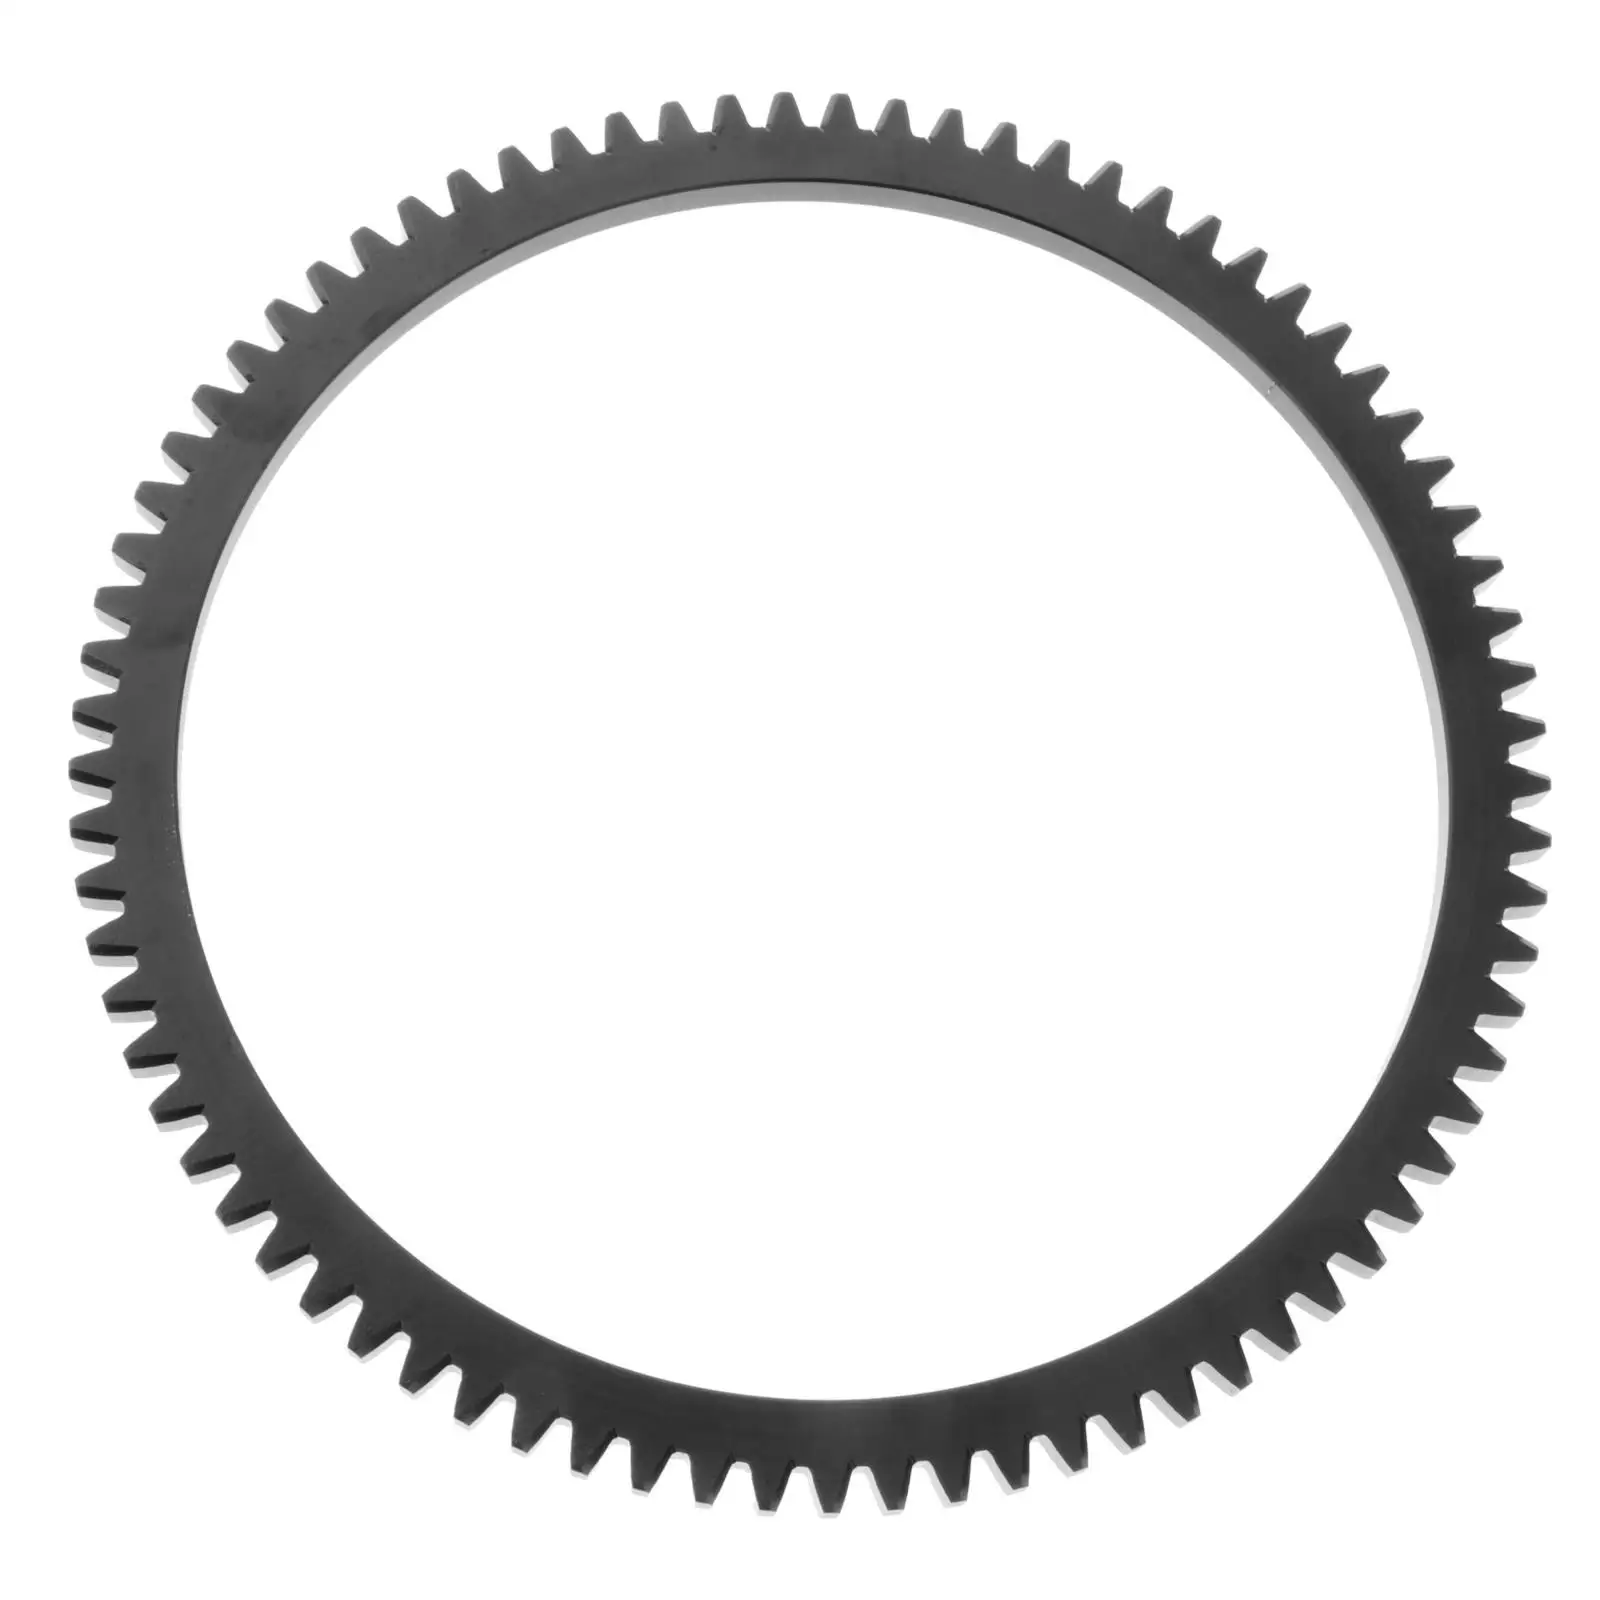 

Flywheel Crown Gear Rings 6AH-85550 Fit for Yamaha F15A Outboard Motor 15HP 6AH F20 ,Direct Replaces